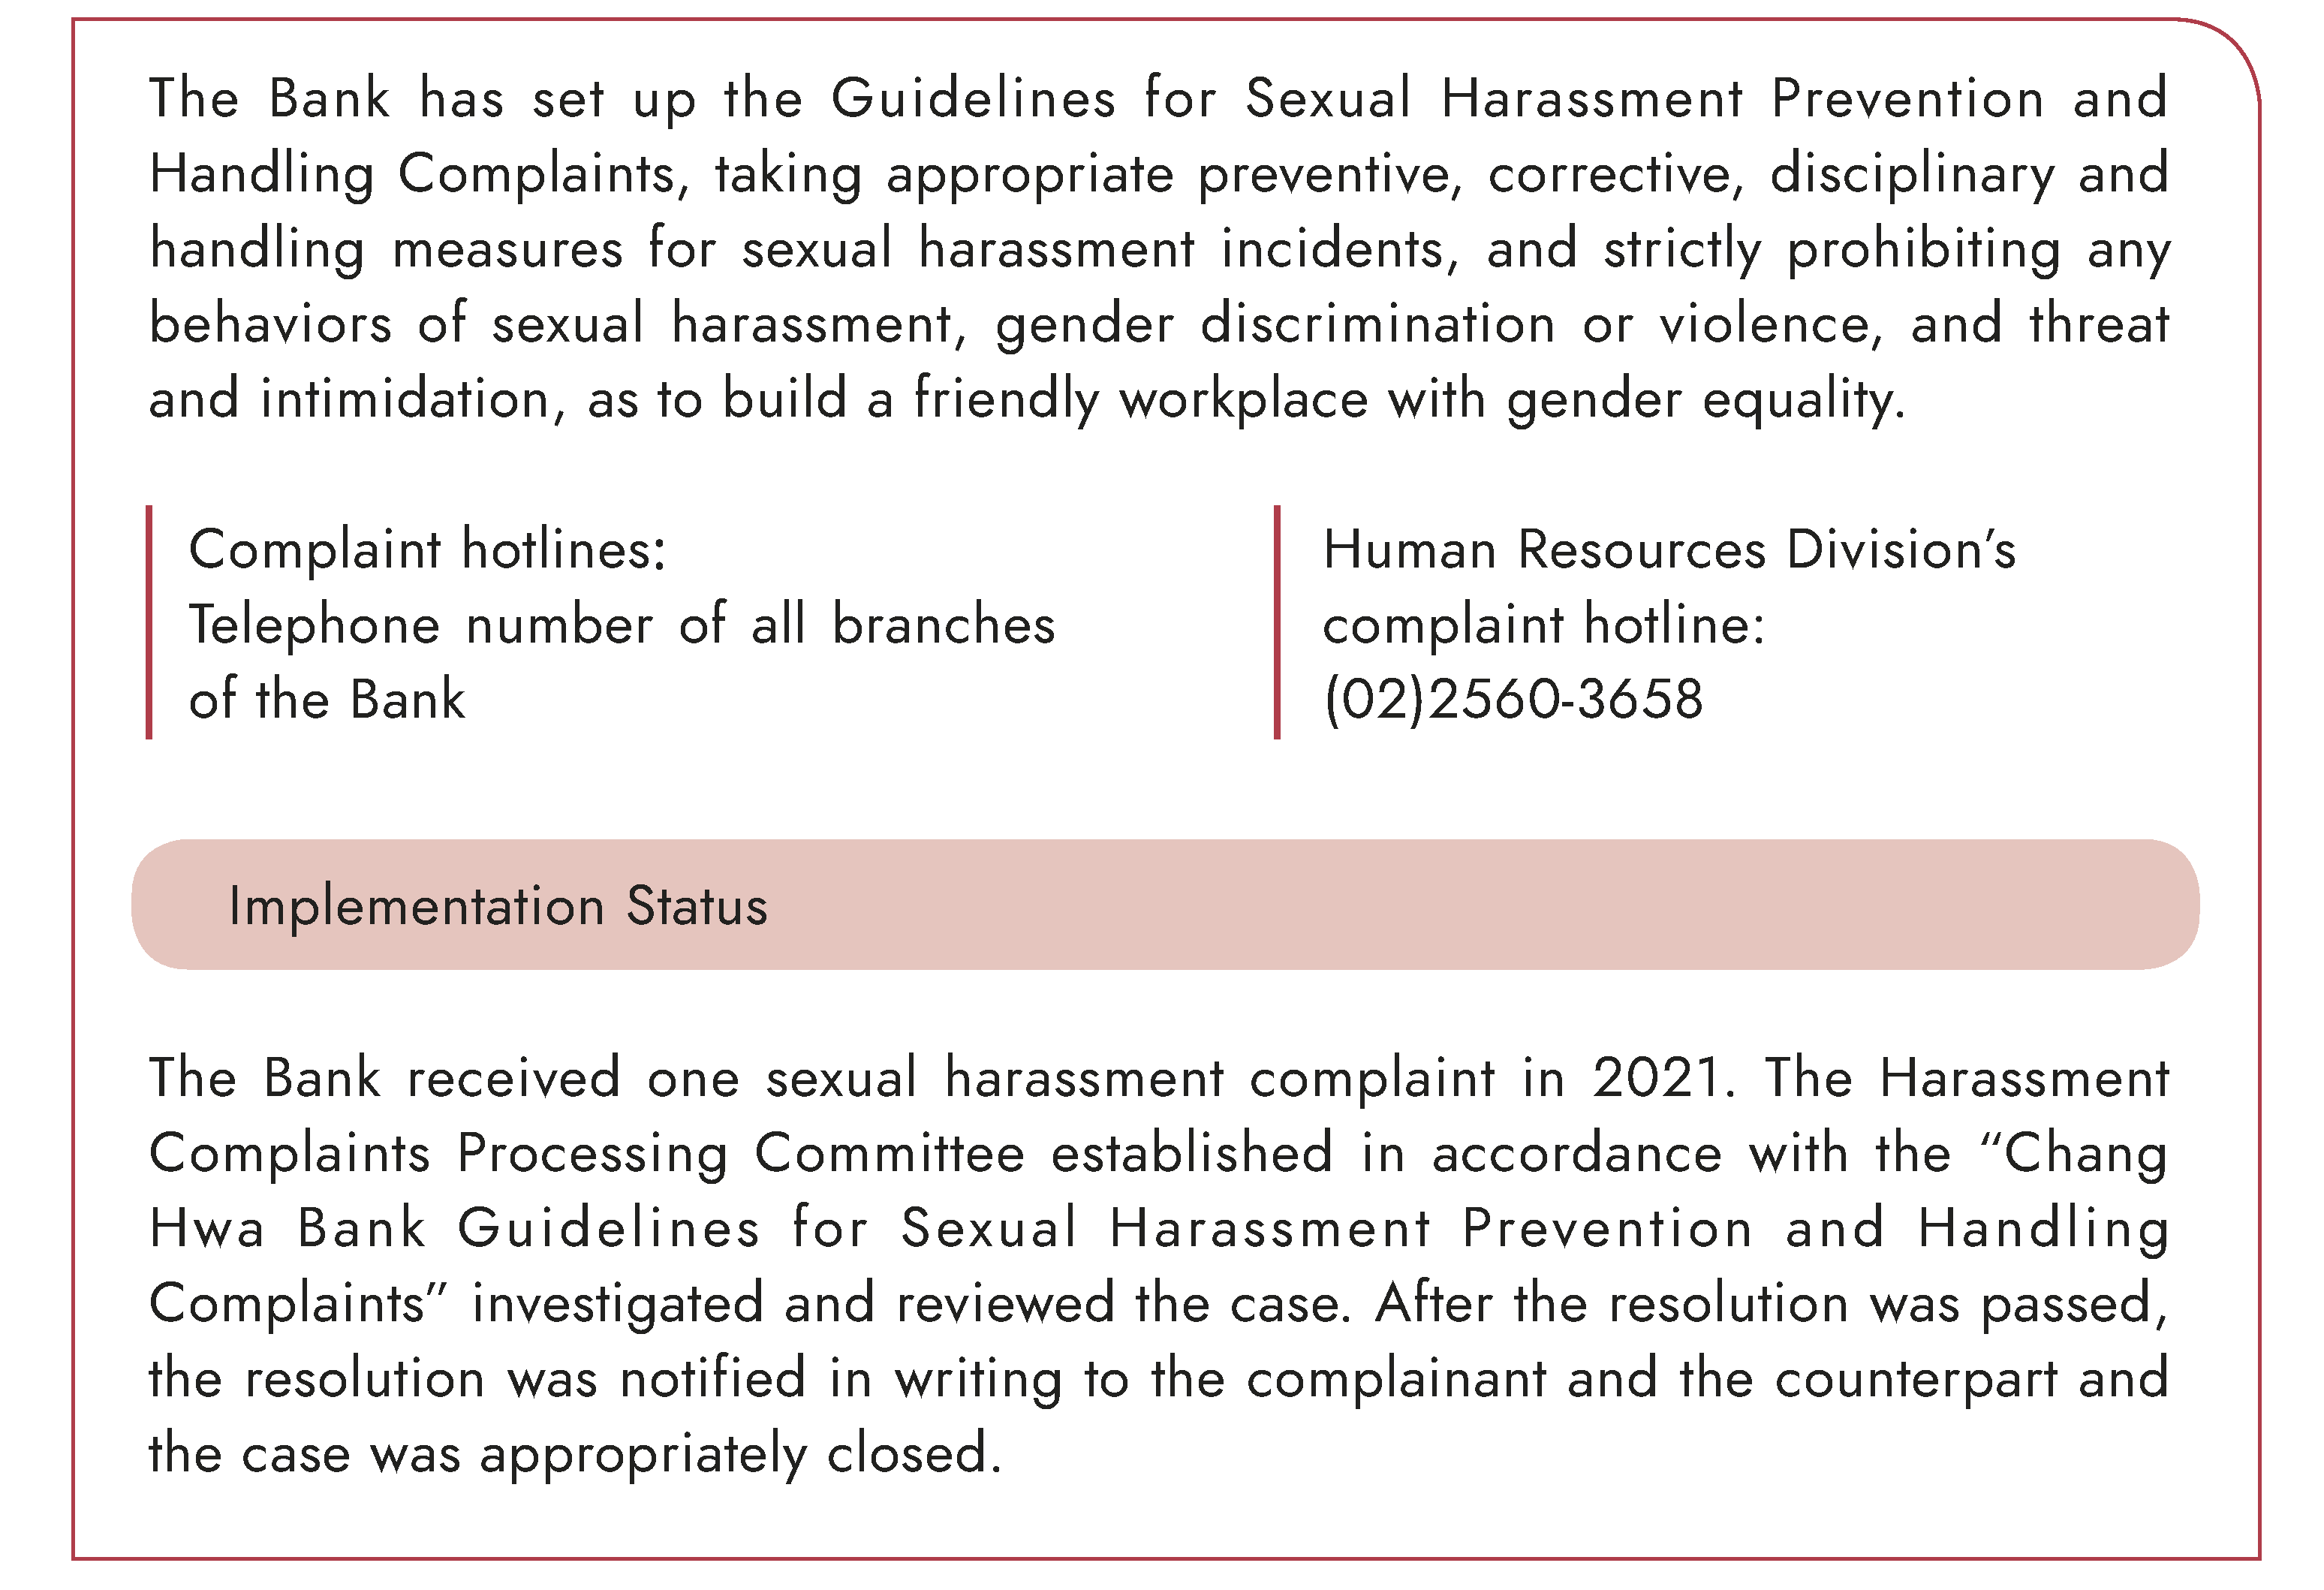 Measures for Sexual Harassment Prevention